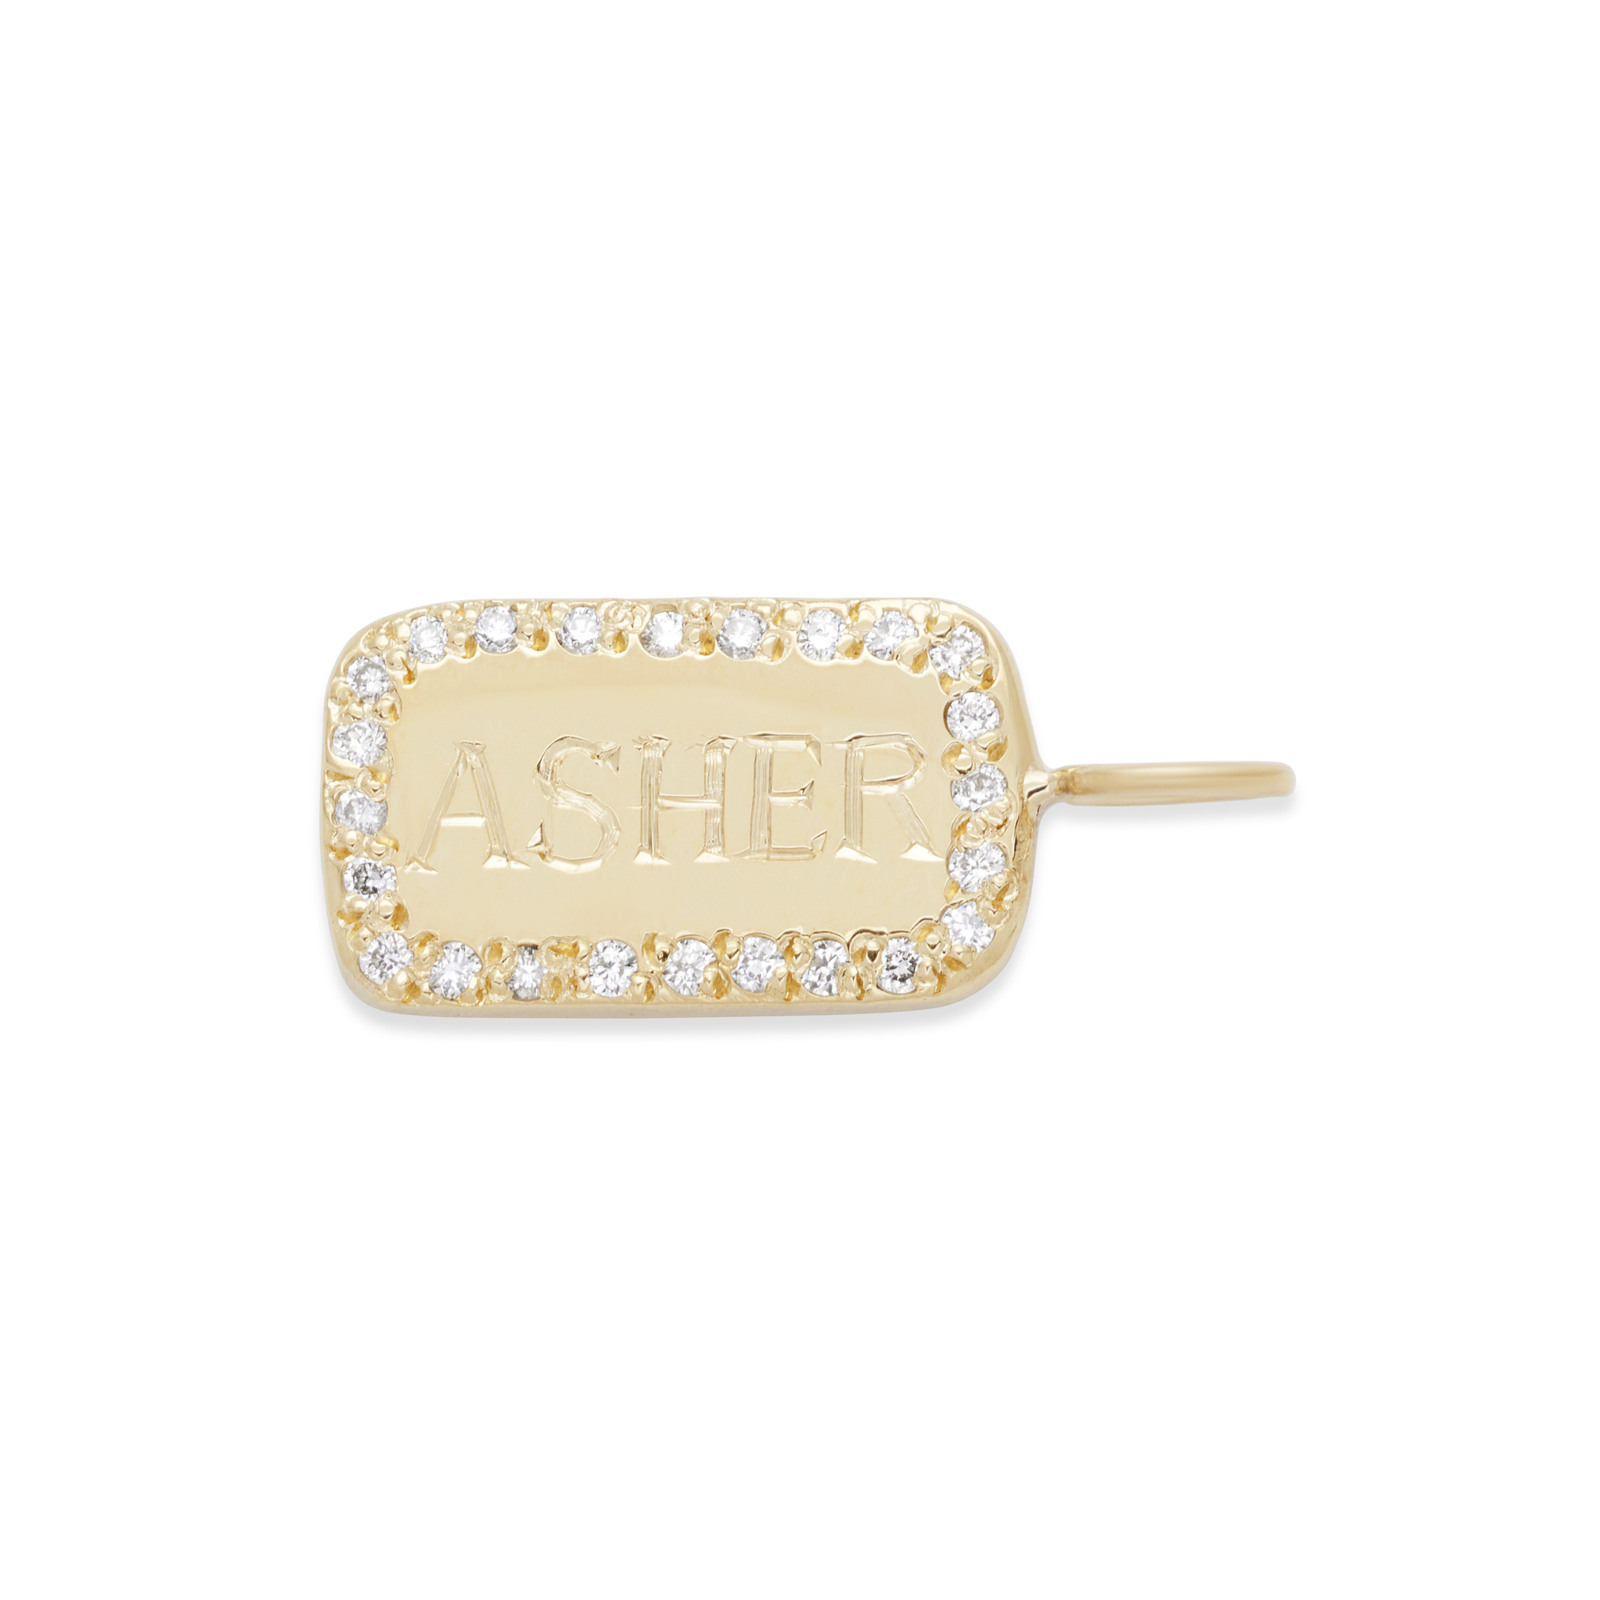 Custom Gold ID Tablet Engraving Charm with personalized diamonds in 14k yellow gold